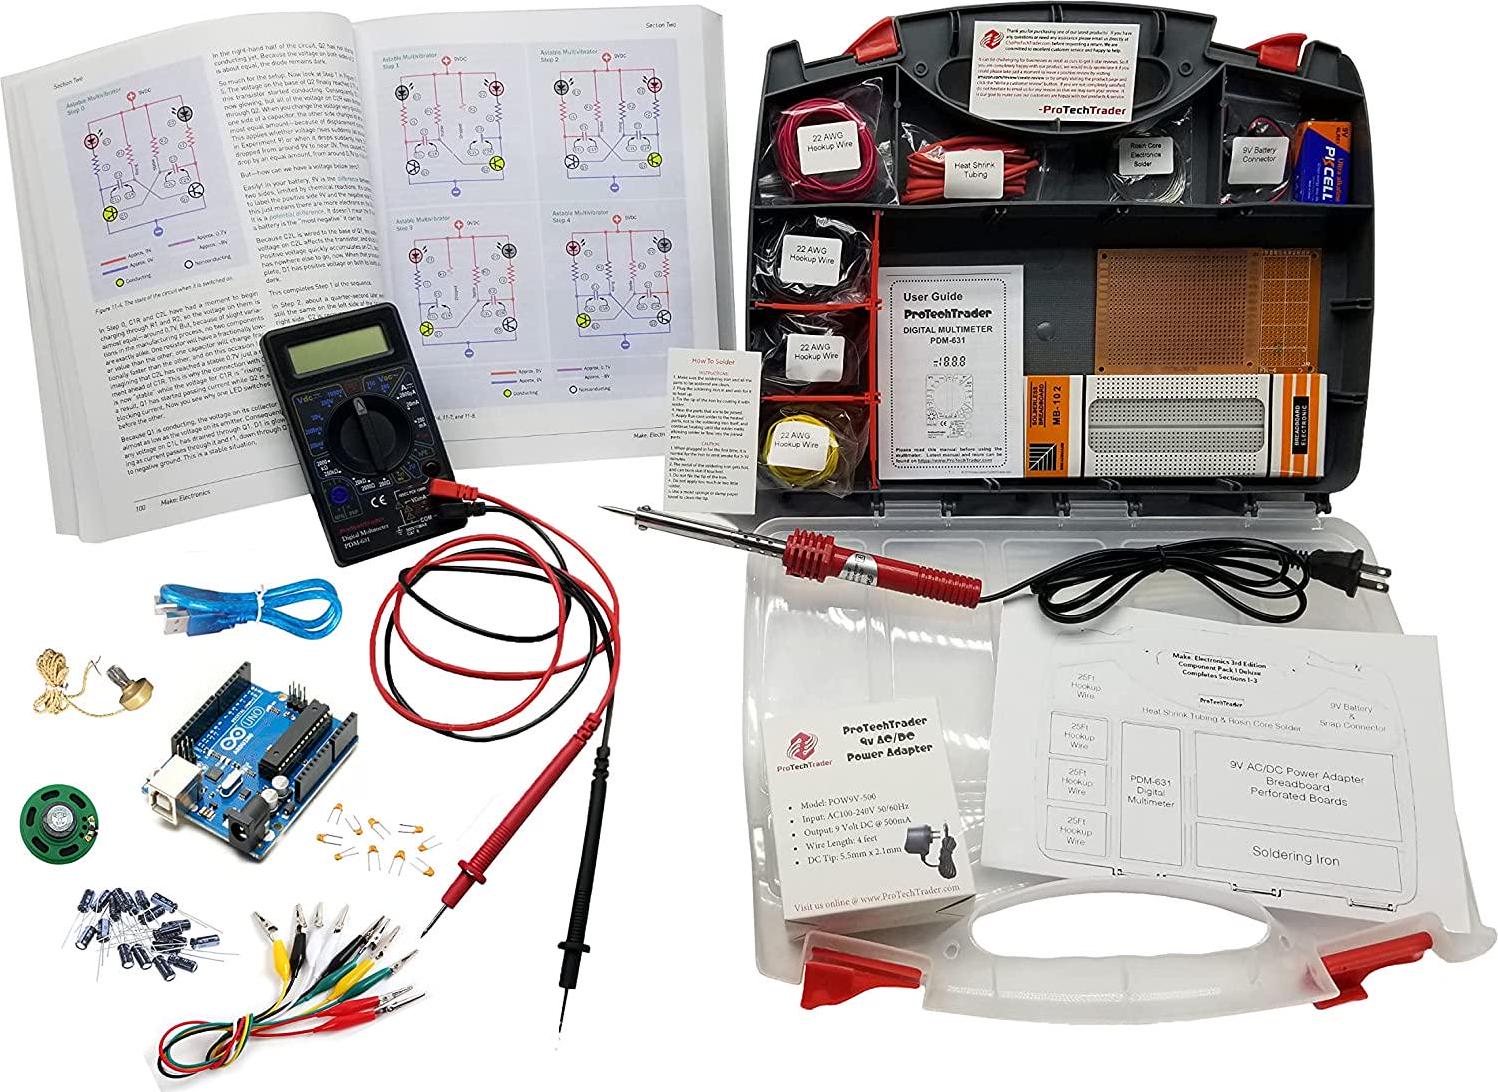 ProTechTrader, Make: Electronics 3rd Edition Kit 1 and 2 Ultimate Deluxe Bundle Includes Book - Beginner Intermediate and Advanced Component Pack Follows The Experiments in Make: Electronics Third by Charles Platt